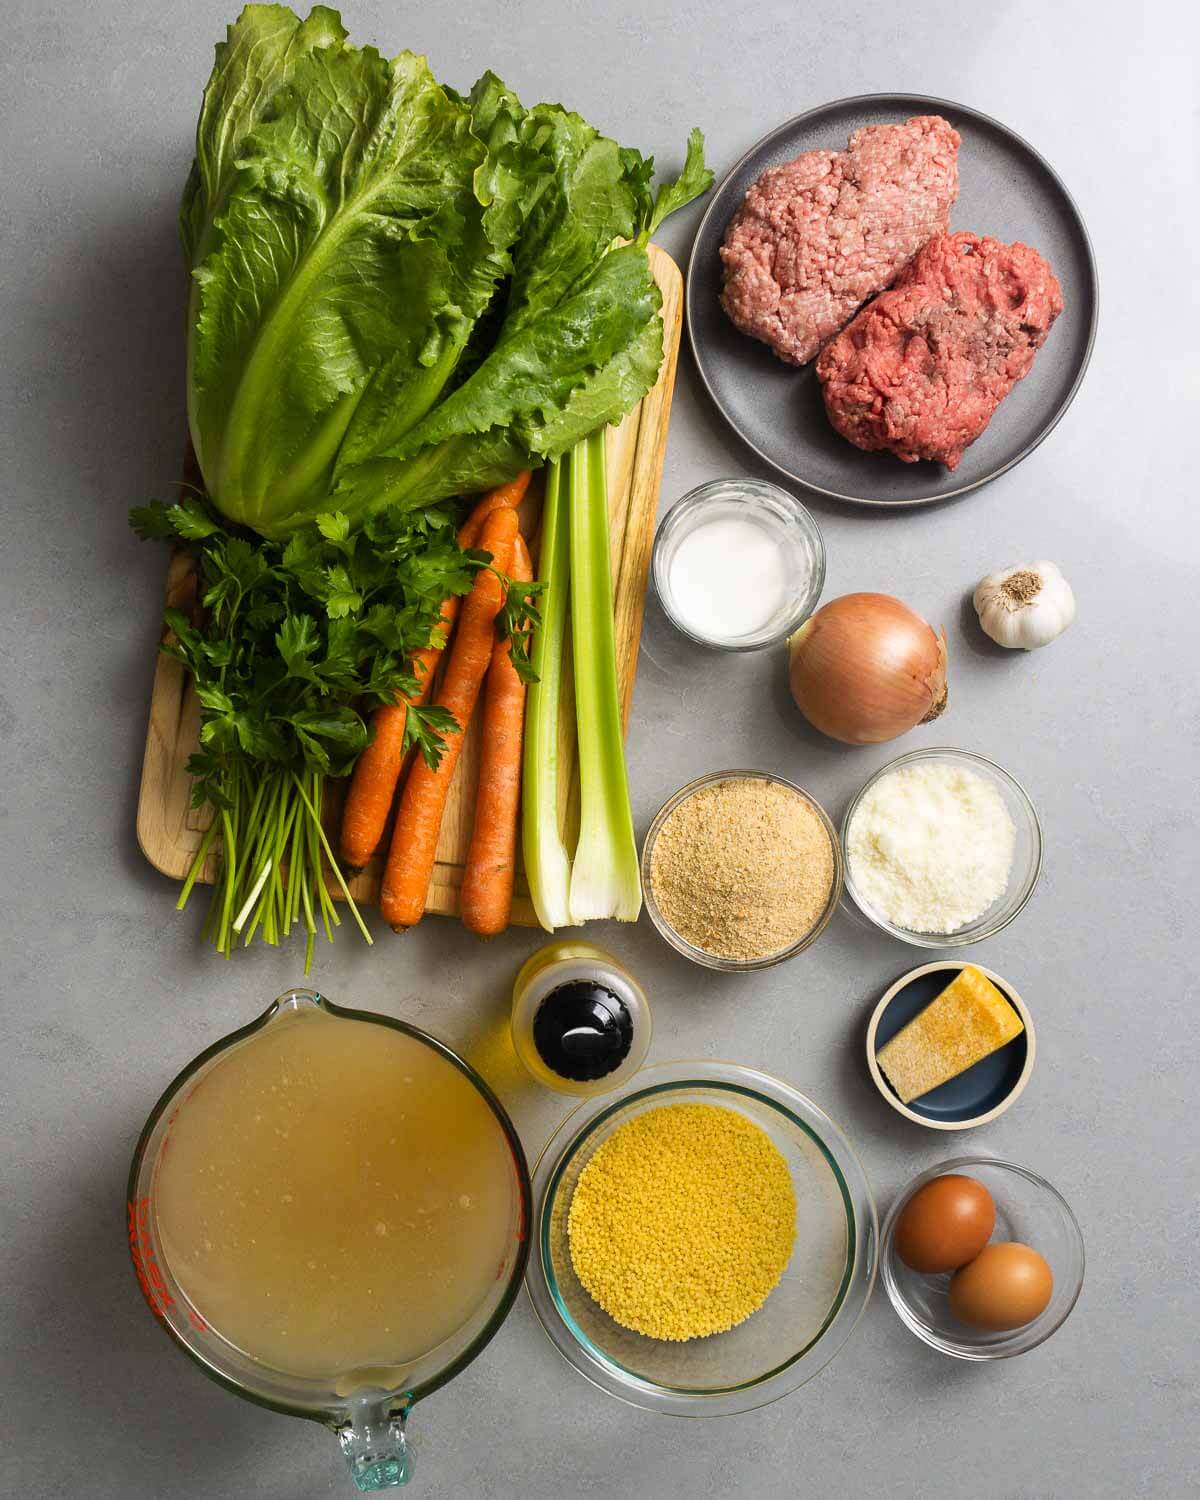 Ingredients shown: escarole, parsley, carrots, celery, ground beef and pork, milk, onion, garlic, breadcrumbs, pecorino, parmesan rind, olive oil, chicken stock, acini di pepe, and eggs.